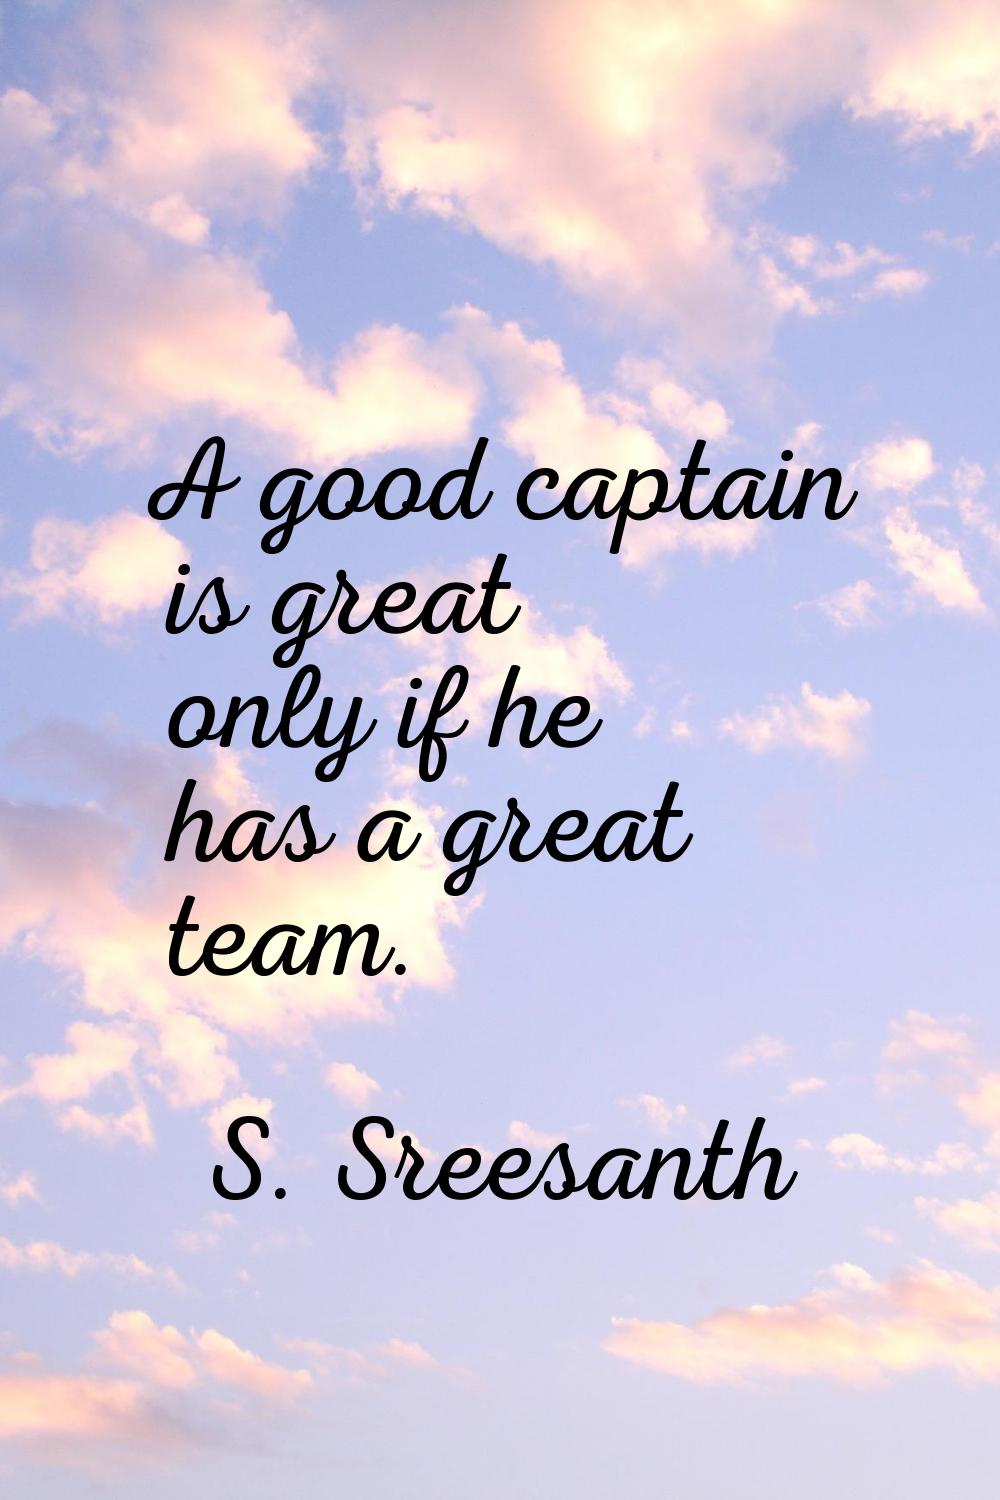 A good captain is great only if he has a great team.